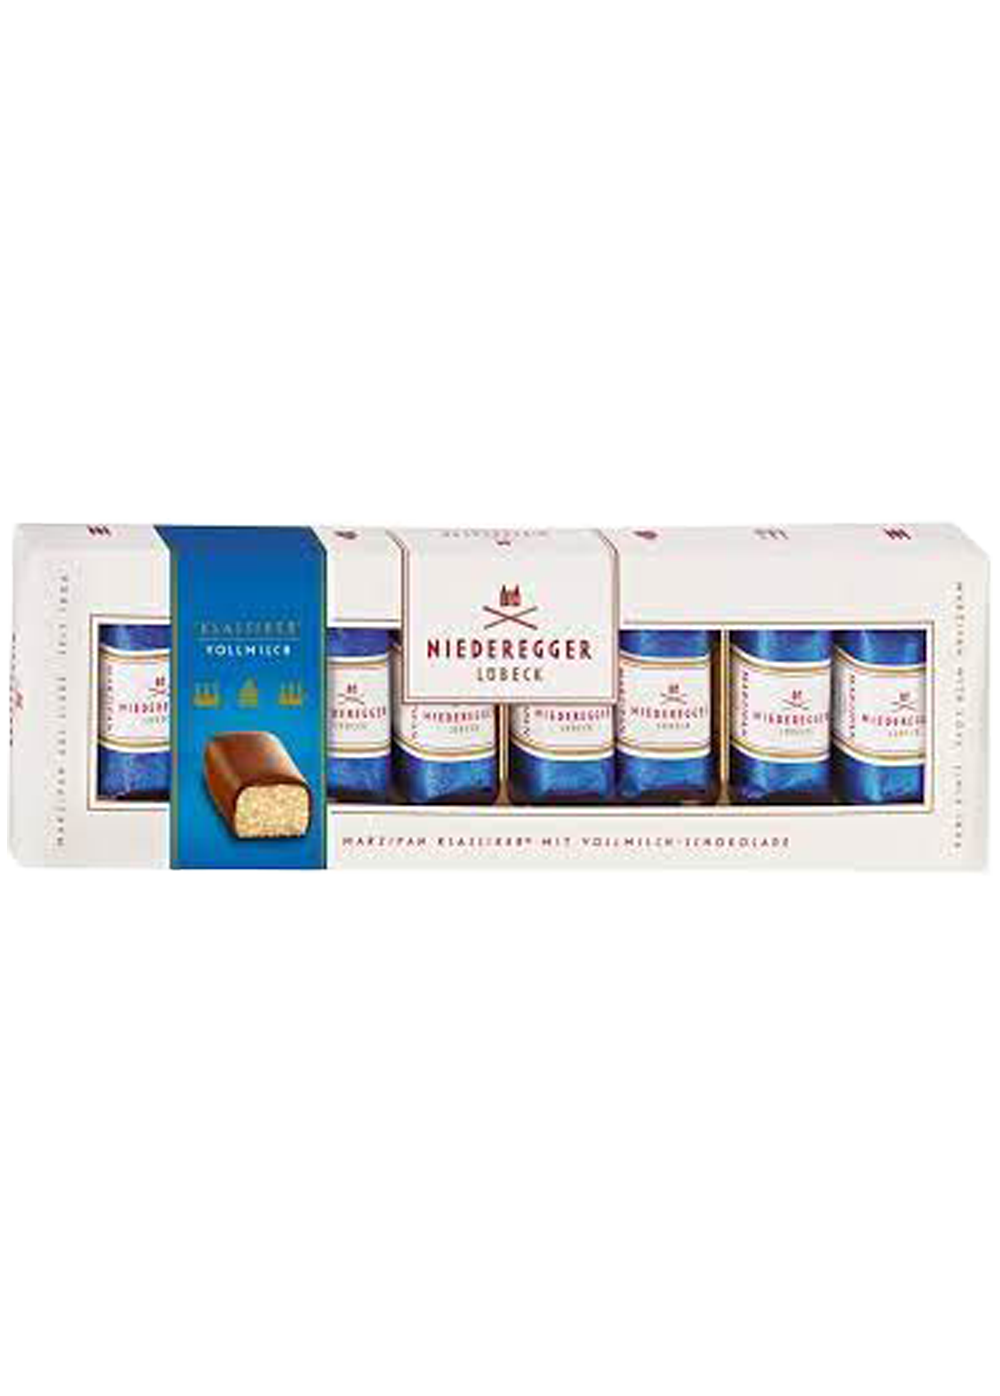 Niederegger Lubeck Praline with Marzipan filling (71%) in milk chocolate (Individuals Only)